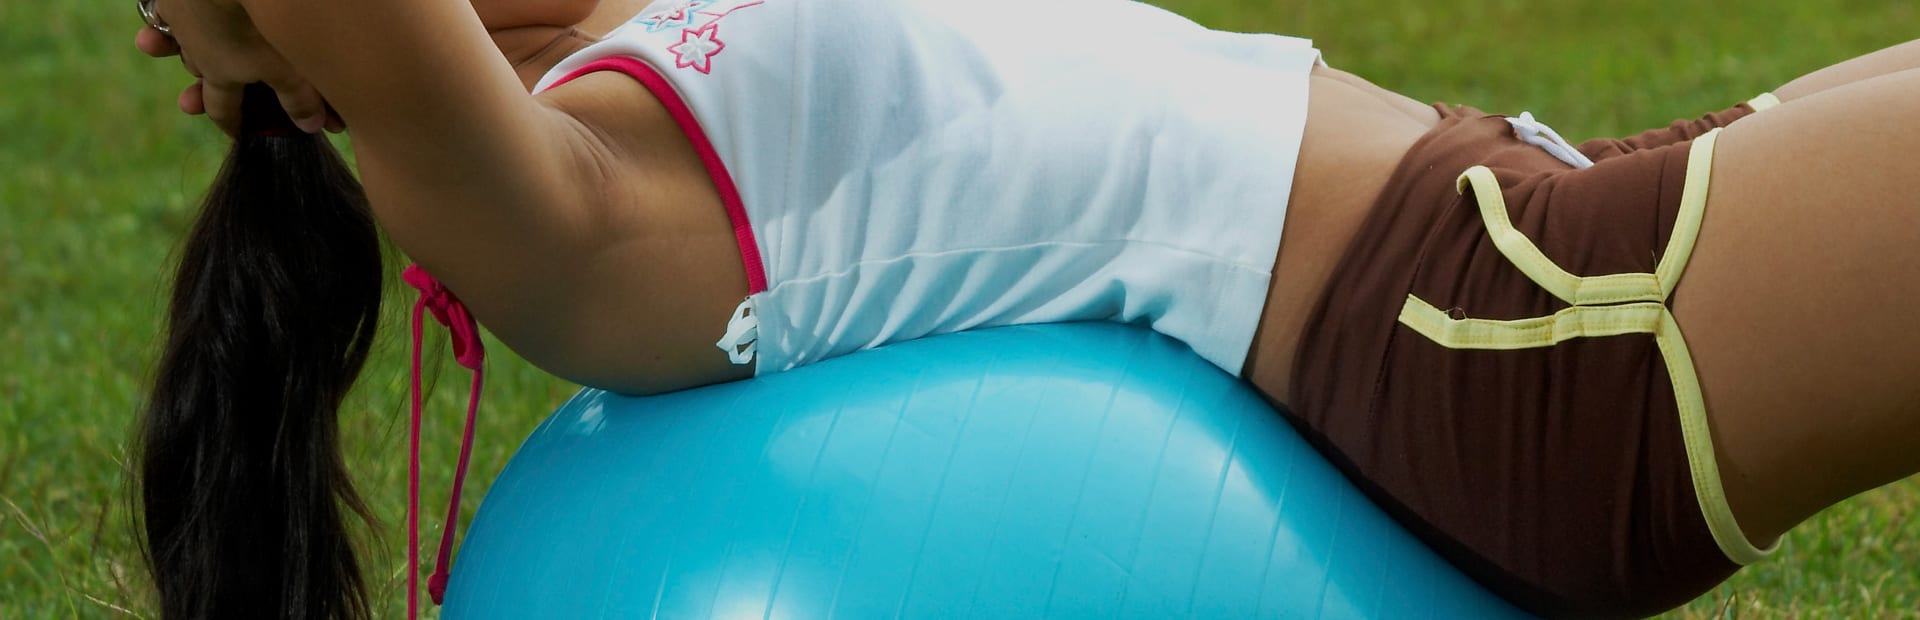 Outdoor training student stretching on an exercise ball